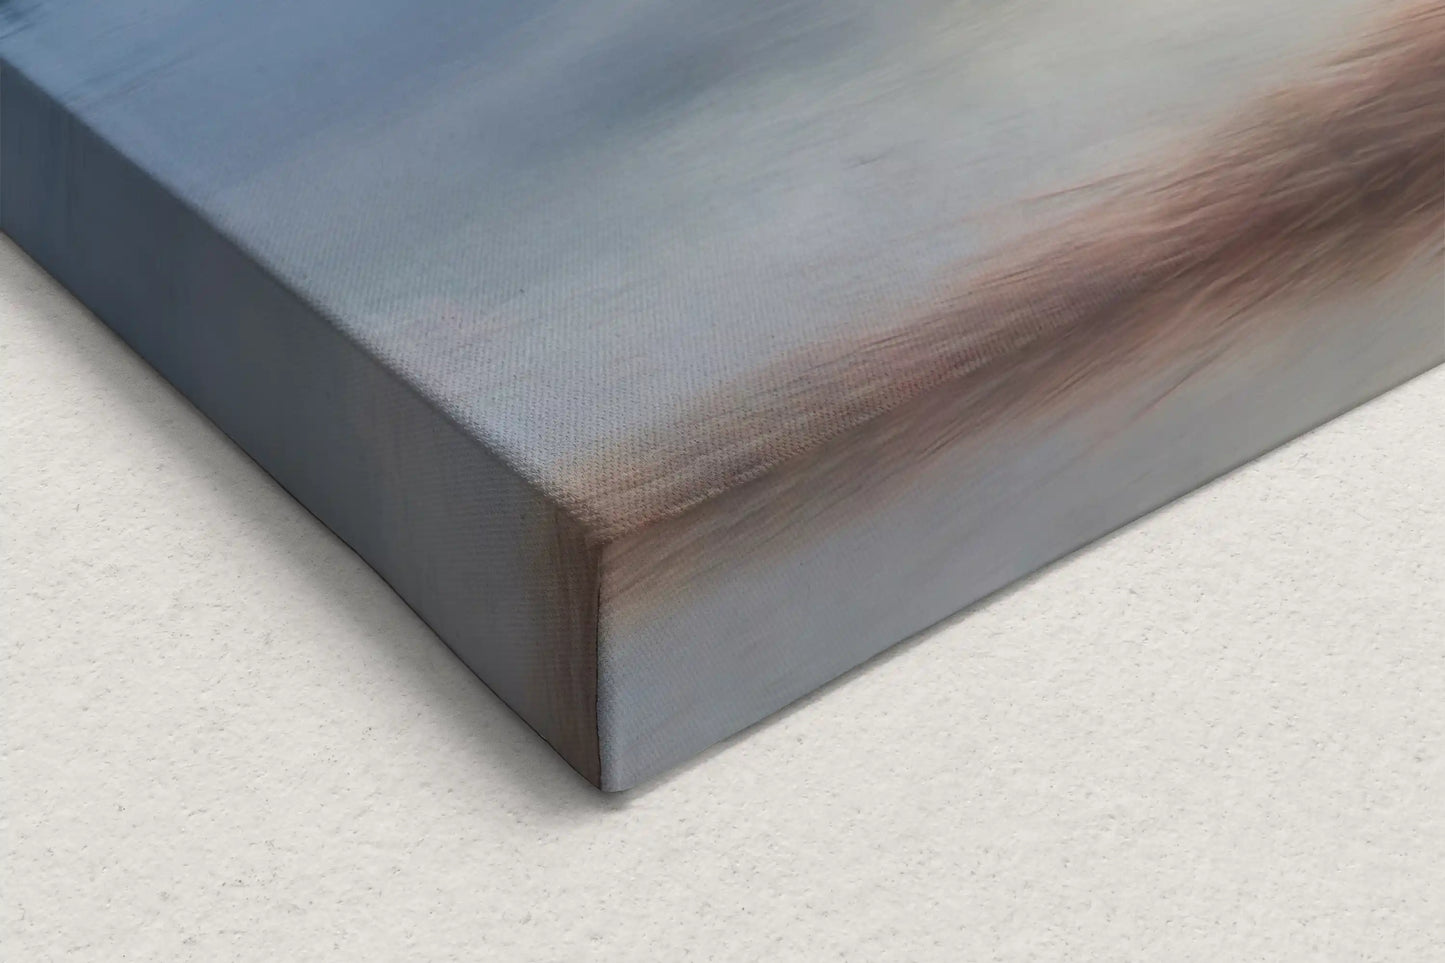 Edge detail of a canvas wall art capturing the serene reflections of Yellowstone Lake Forest during a stormy sunrise.